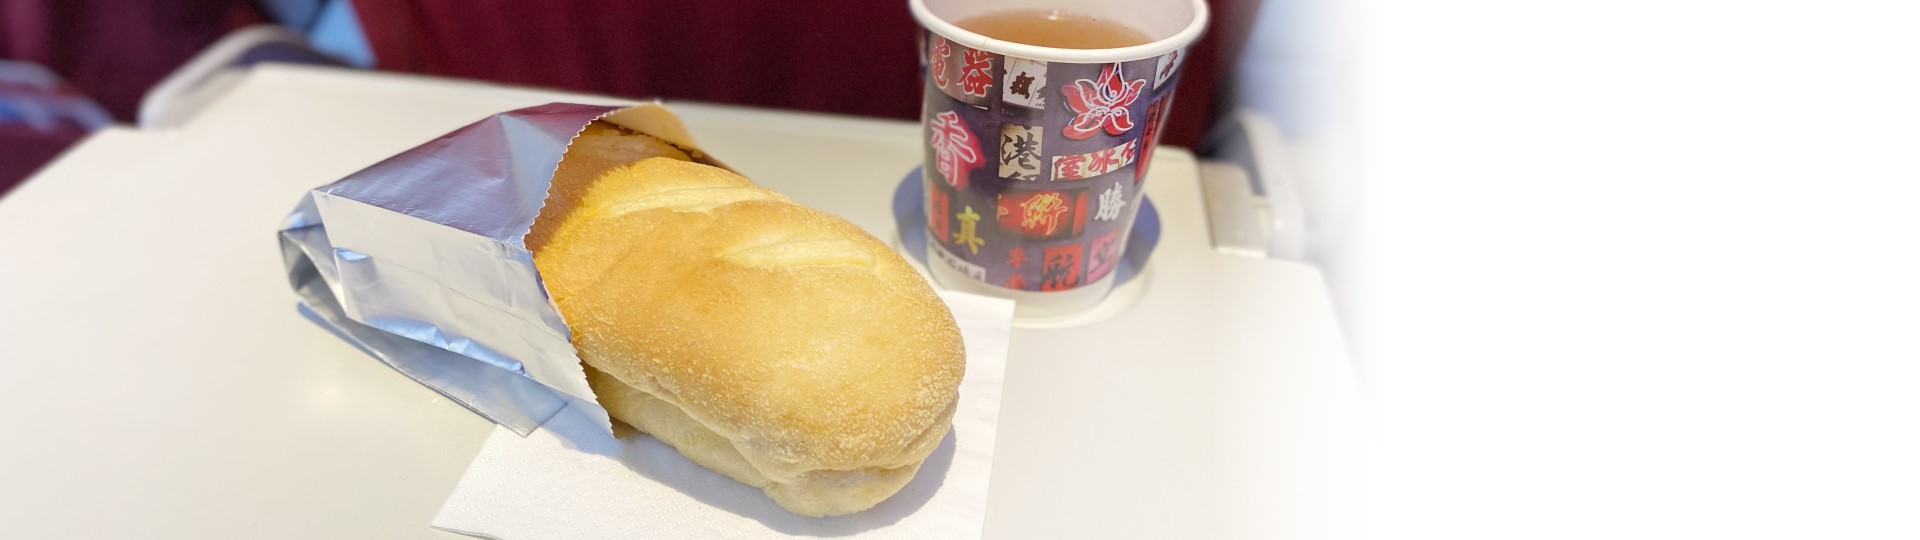 a bread and a cup of tea